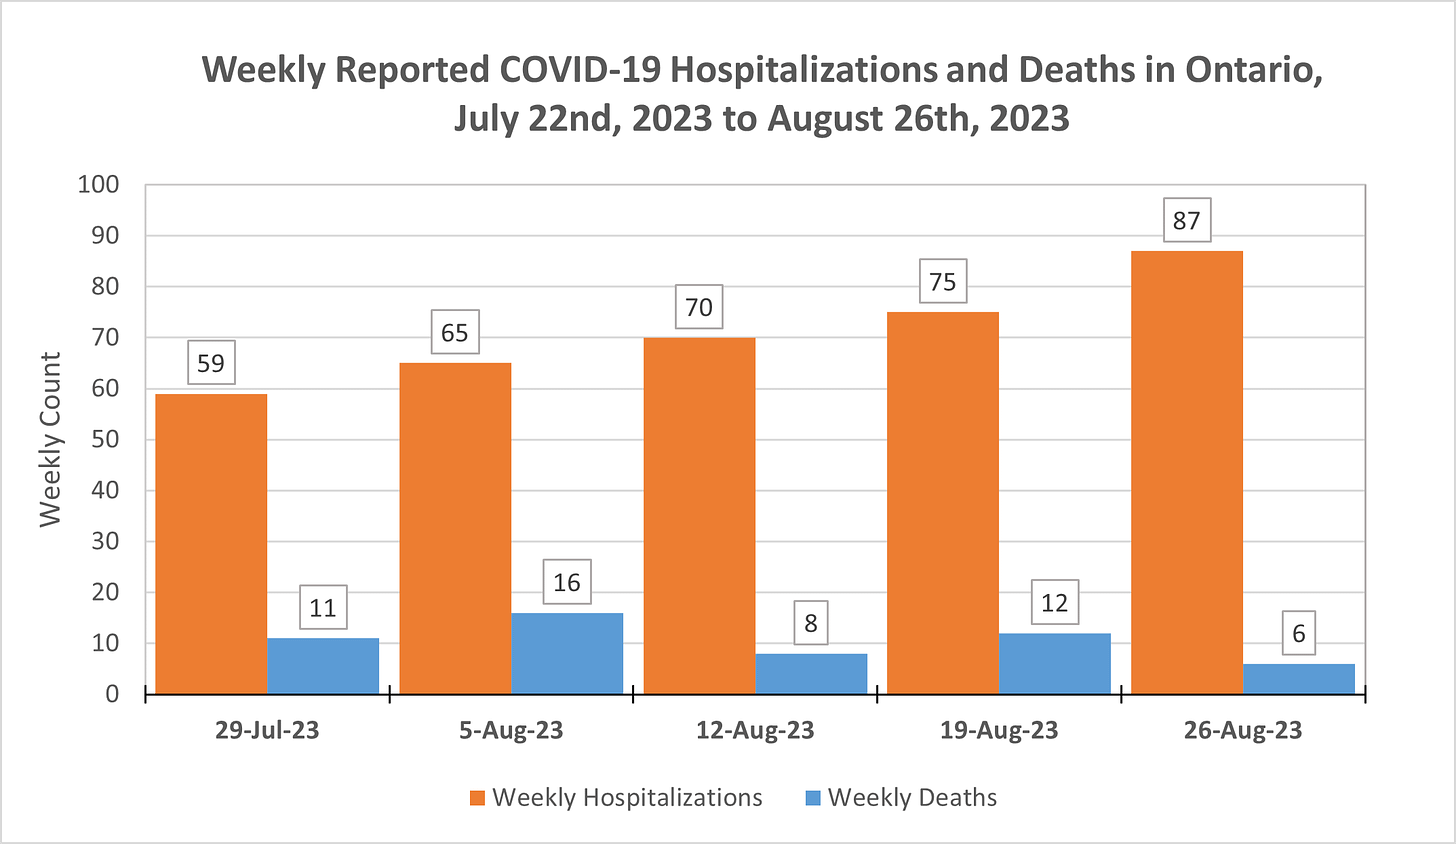 Chart showing weekly COVID-19 hospitalizations and deaths in Ontario for the most recent 5 weeks. Hospitalizations increased from 59 July 29th, to 65 August 5th, 70 August 12th, 75 August 19th, and 87 August 26th. Deaths show no clear pattern, with 11 July 29th, 16 August 5th, 8 August 12th, 12 August 19th, and 6 August 26th.